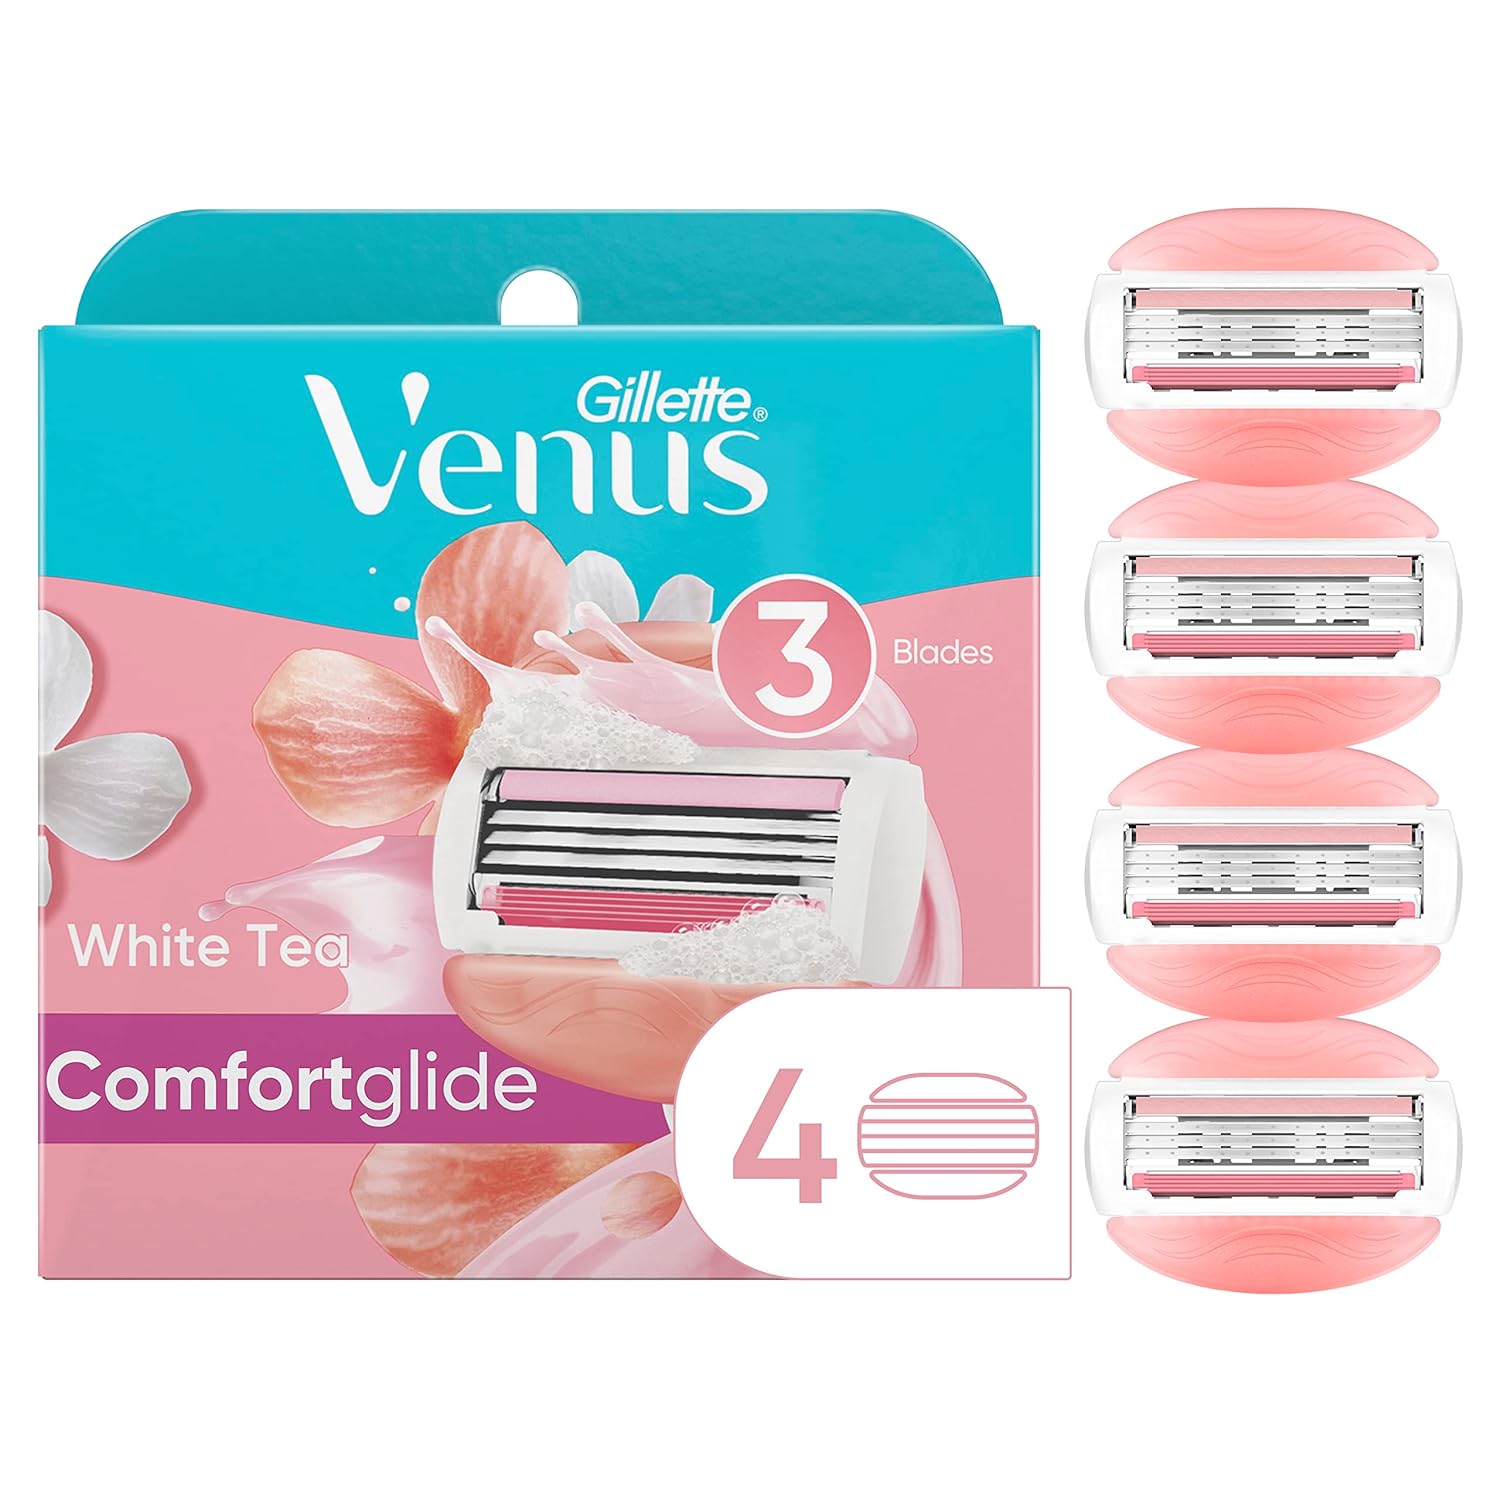 Wholesale prices with free shipping all over United States Gillette Venus ComfortGlide Womens Razor Blade Refills, 6 Count,(Pack of 1) White Tea Scented Gel Bar Protects Against Skin Irritation - Steven Deals